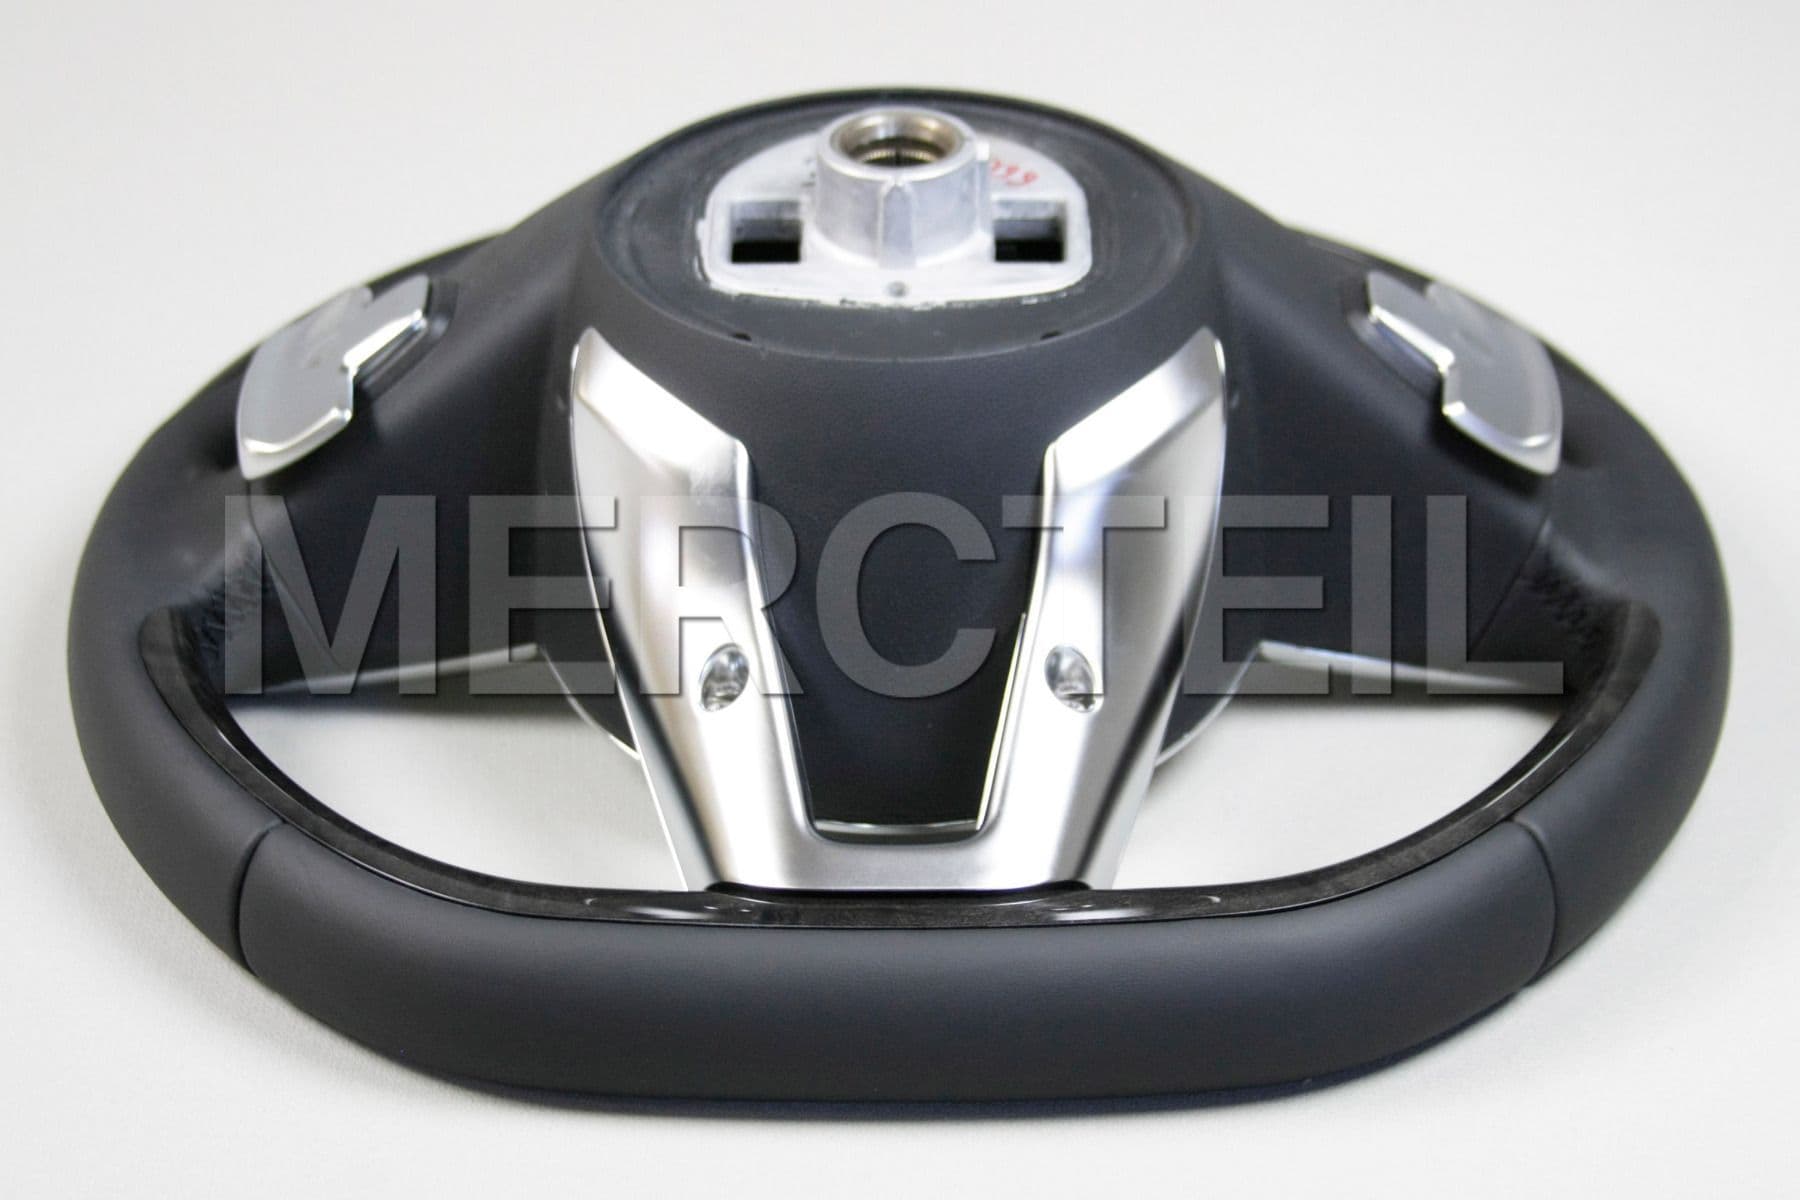 Leather Black Steering Wheel With Poplar Trims for S-Class (part number: A00146026039E38)